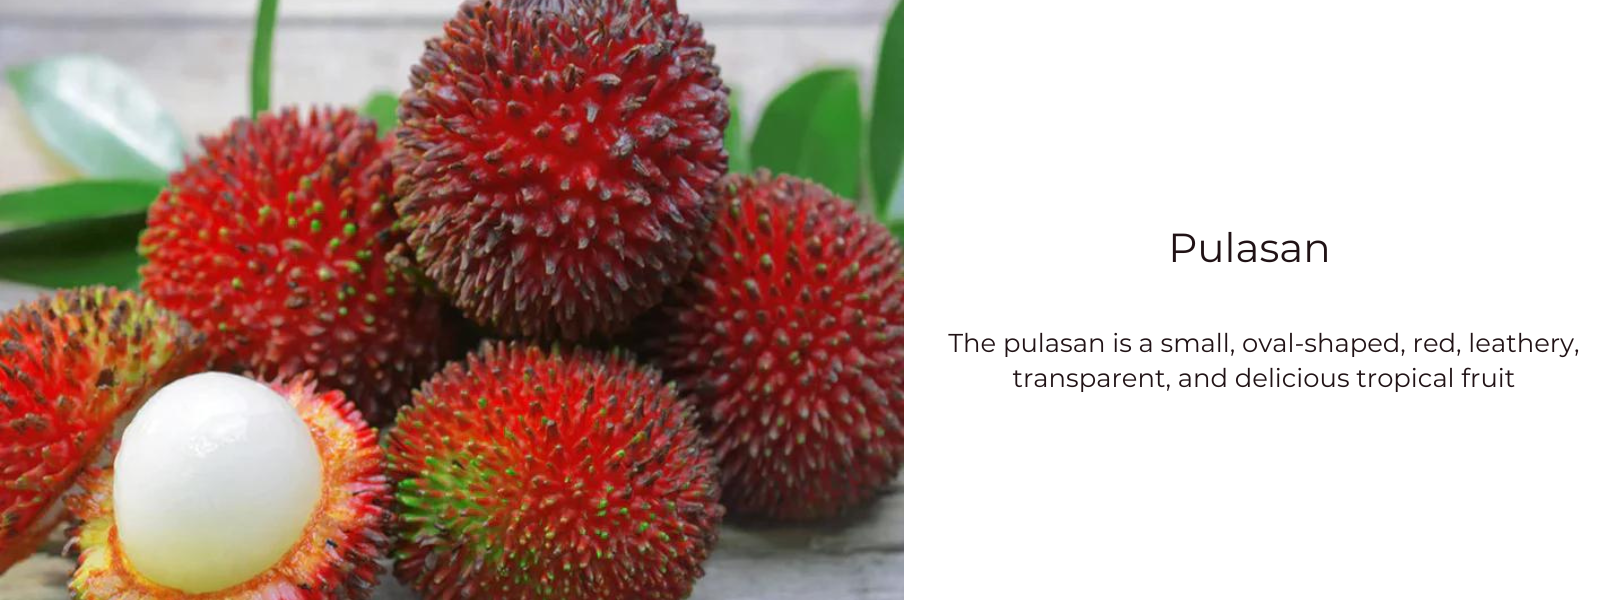 Pulasan – Health Benefits, Uses and Important Facts